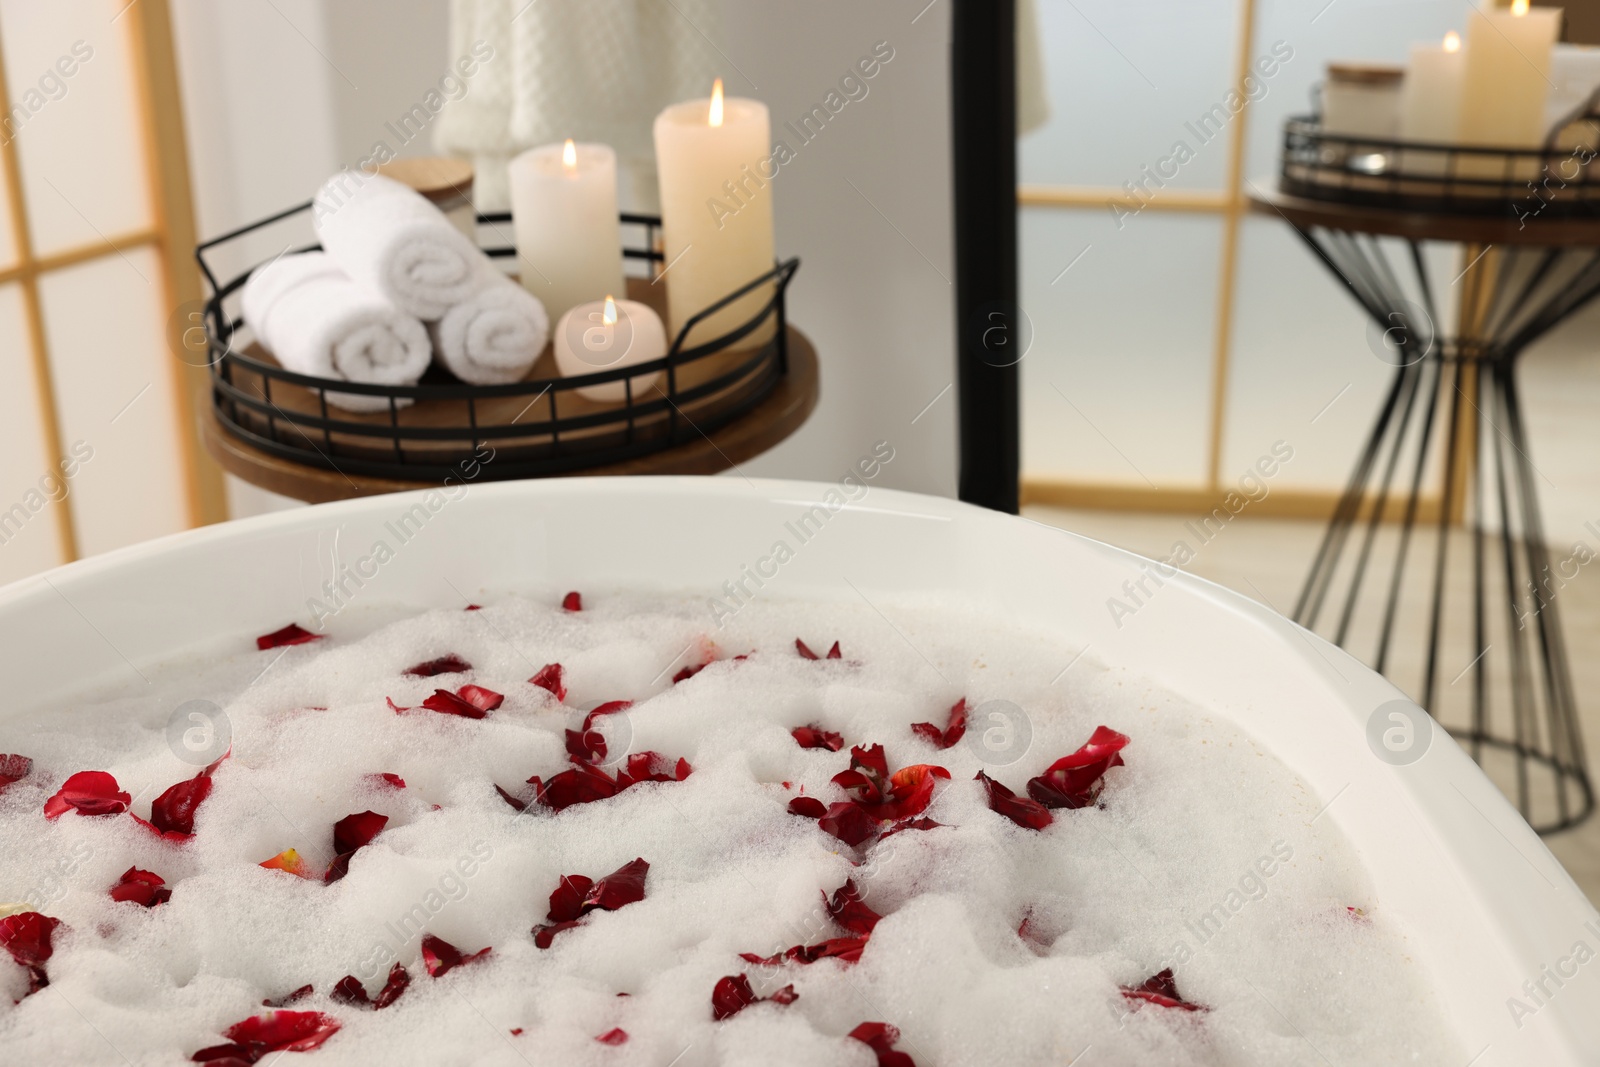 Photo of Bath tub with foam and red rose petals in bathroom